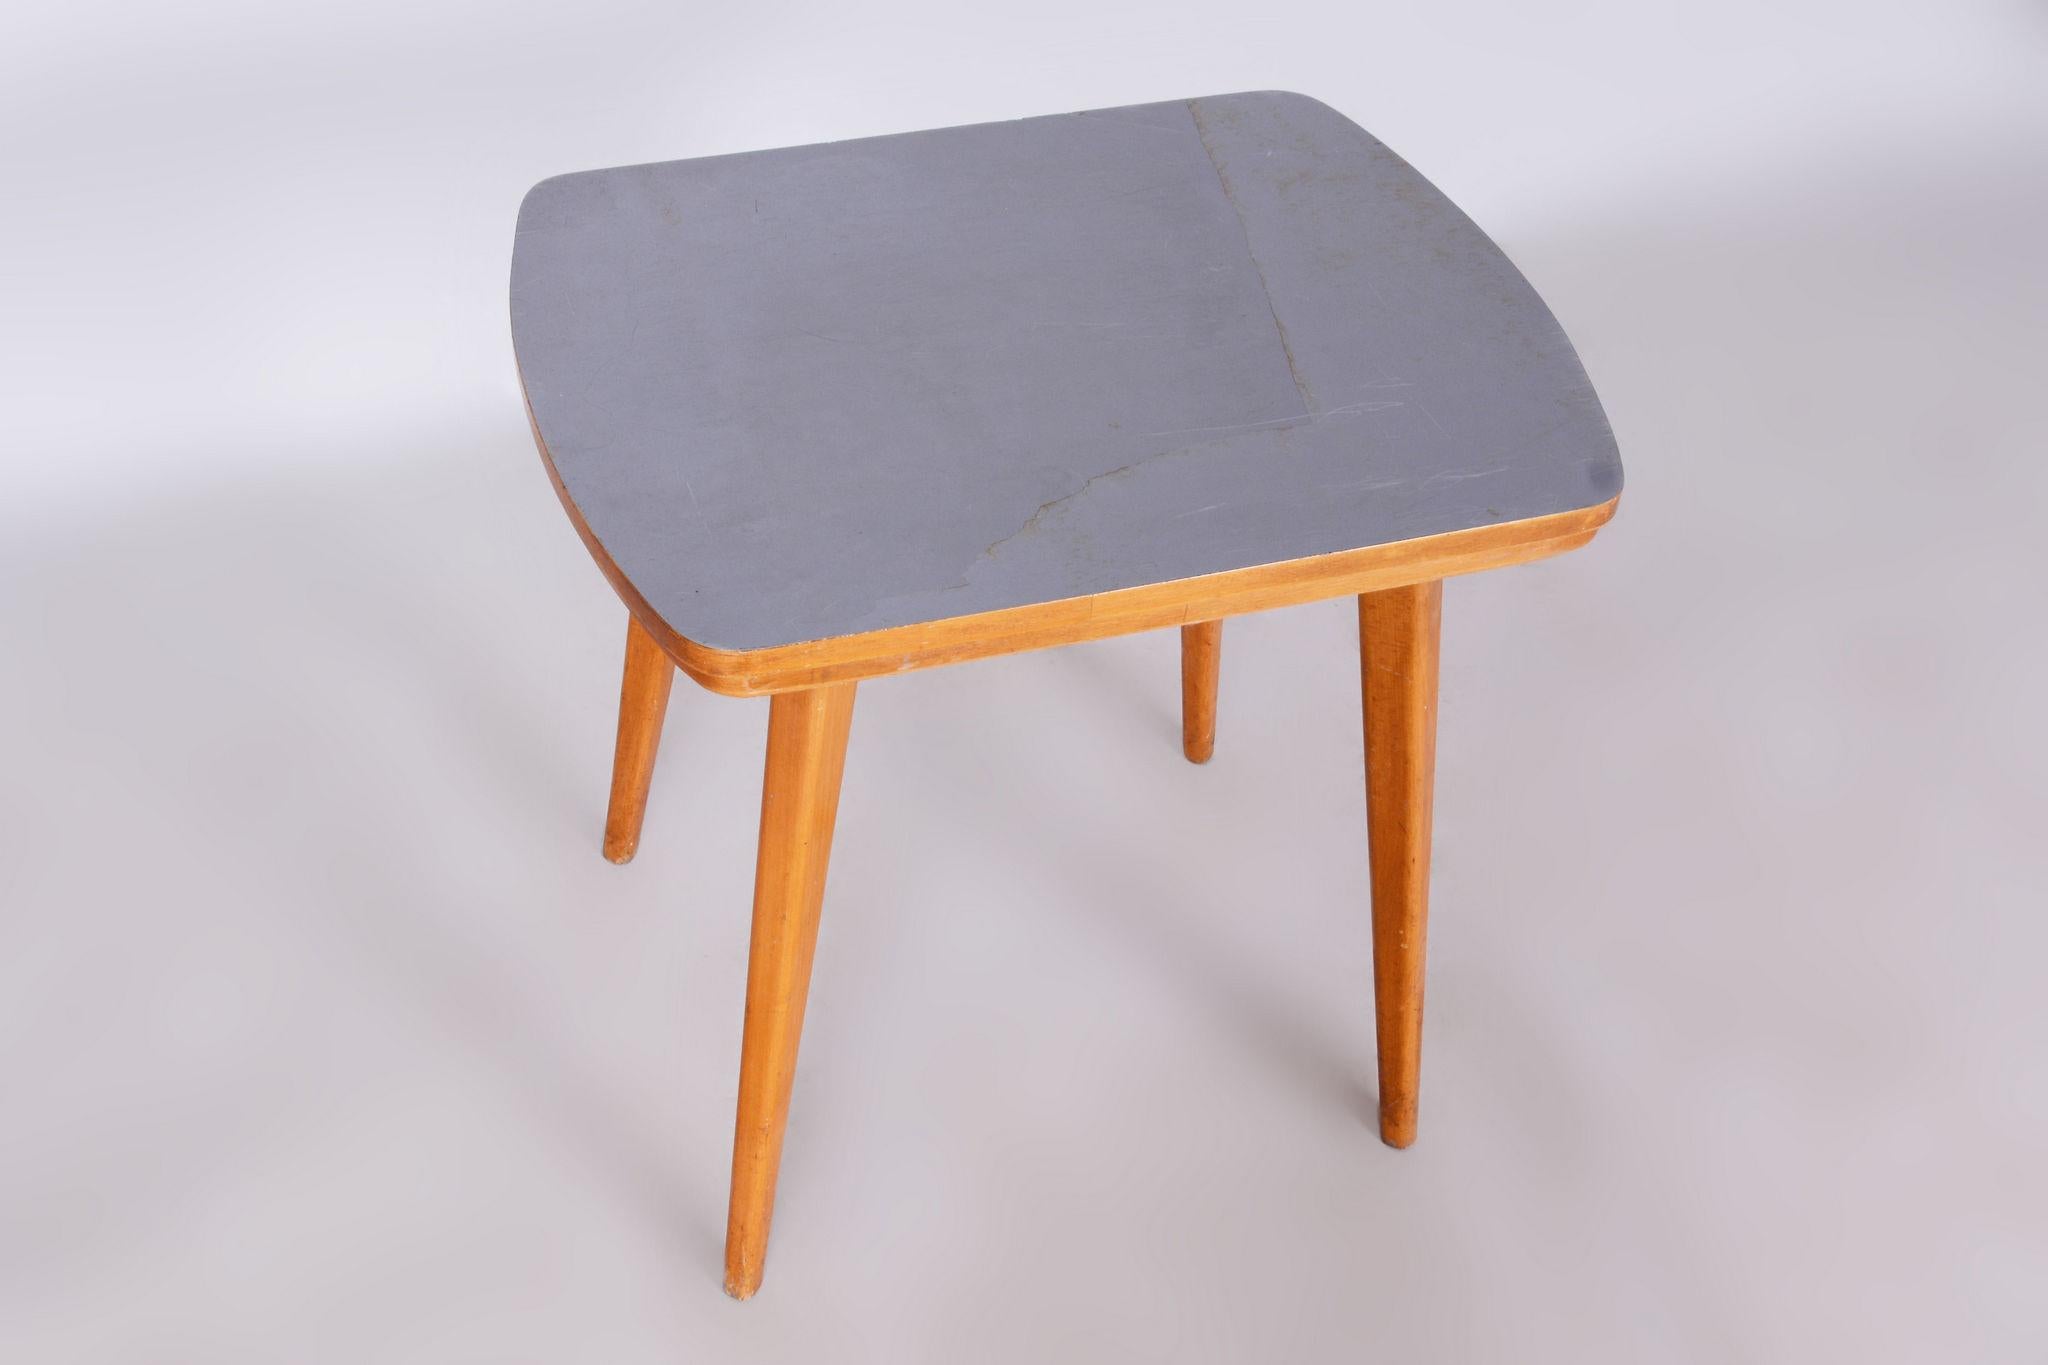 Wood Restored MidCentury Coffee Table, Beech, Umakart, Revived Polish, Czechia, 1950s For Sale